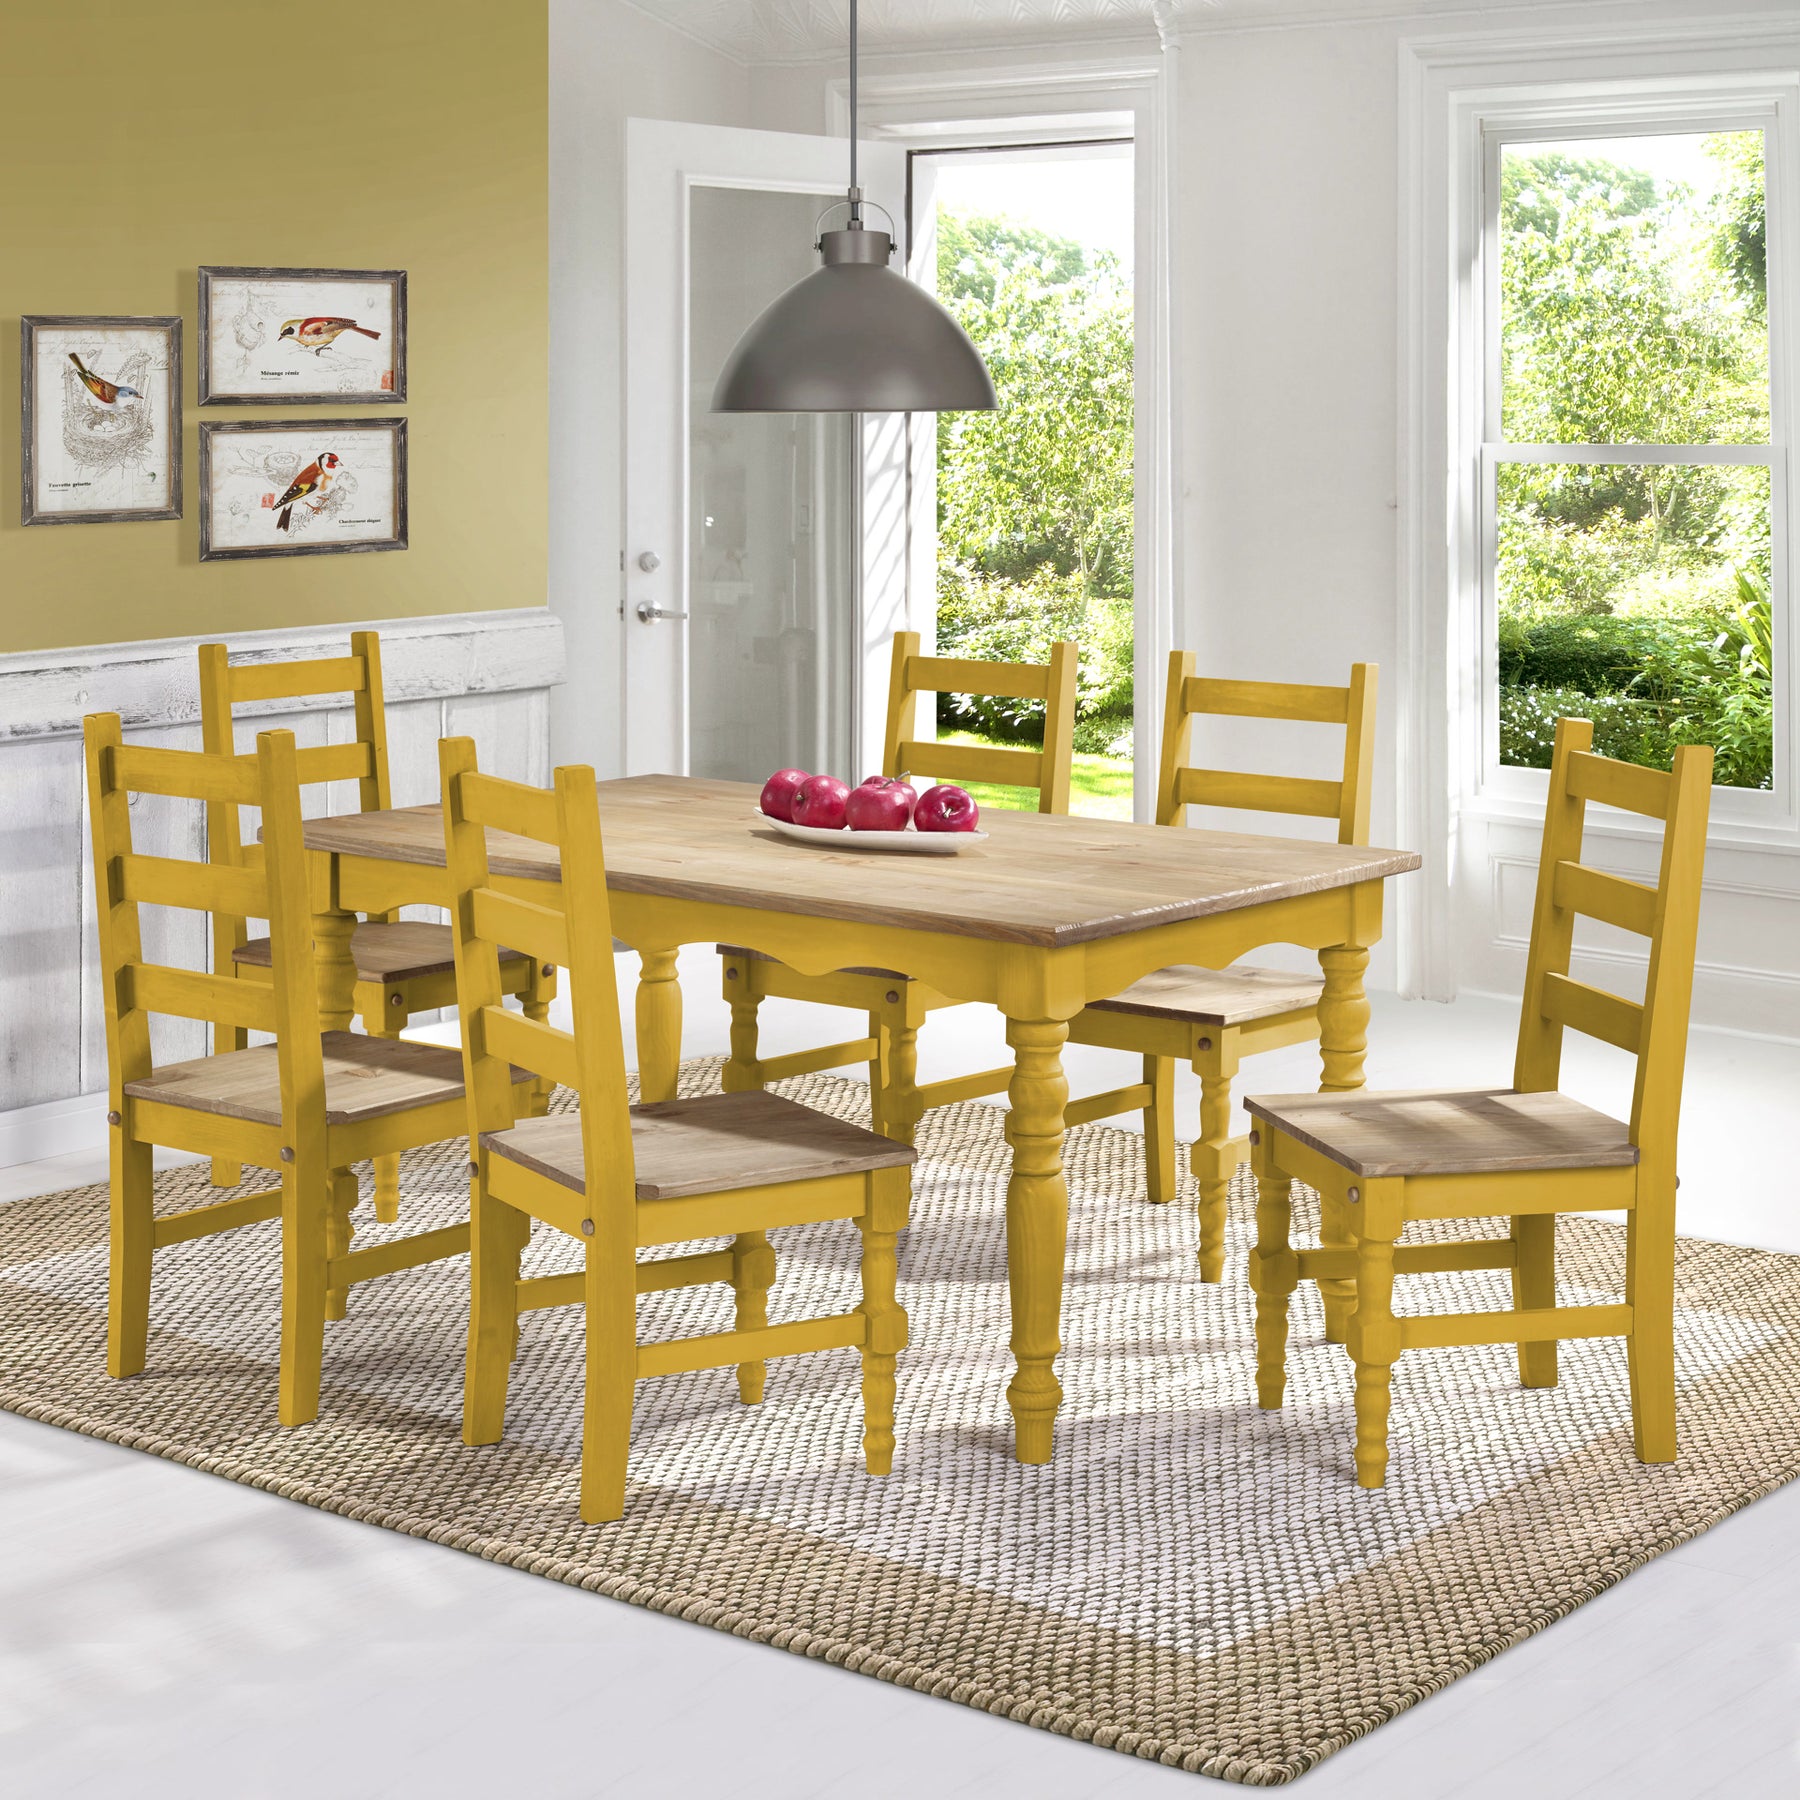 Manhattan Comfort Jay 7-Piece Solid Wood Dining Set with 6 Chairs and 1 Table in Yellow Wash-Minimal & Modern